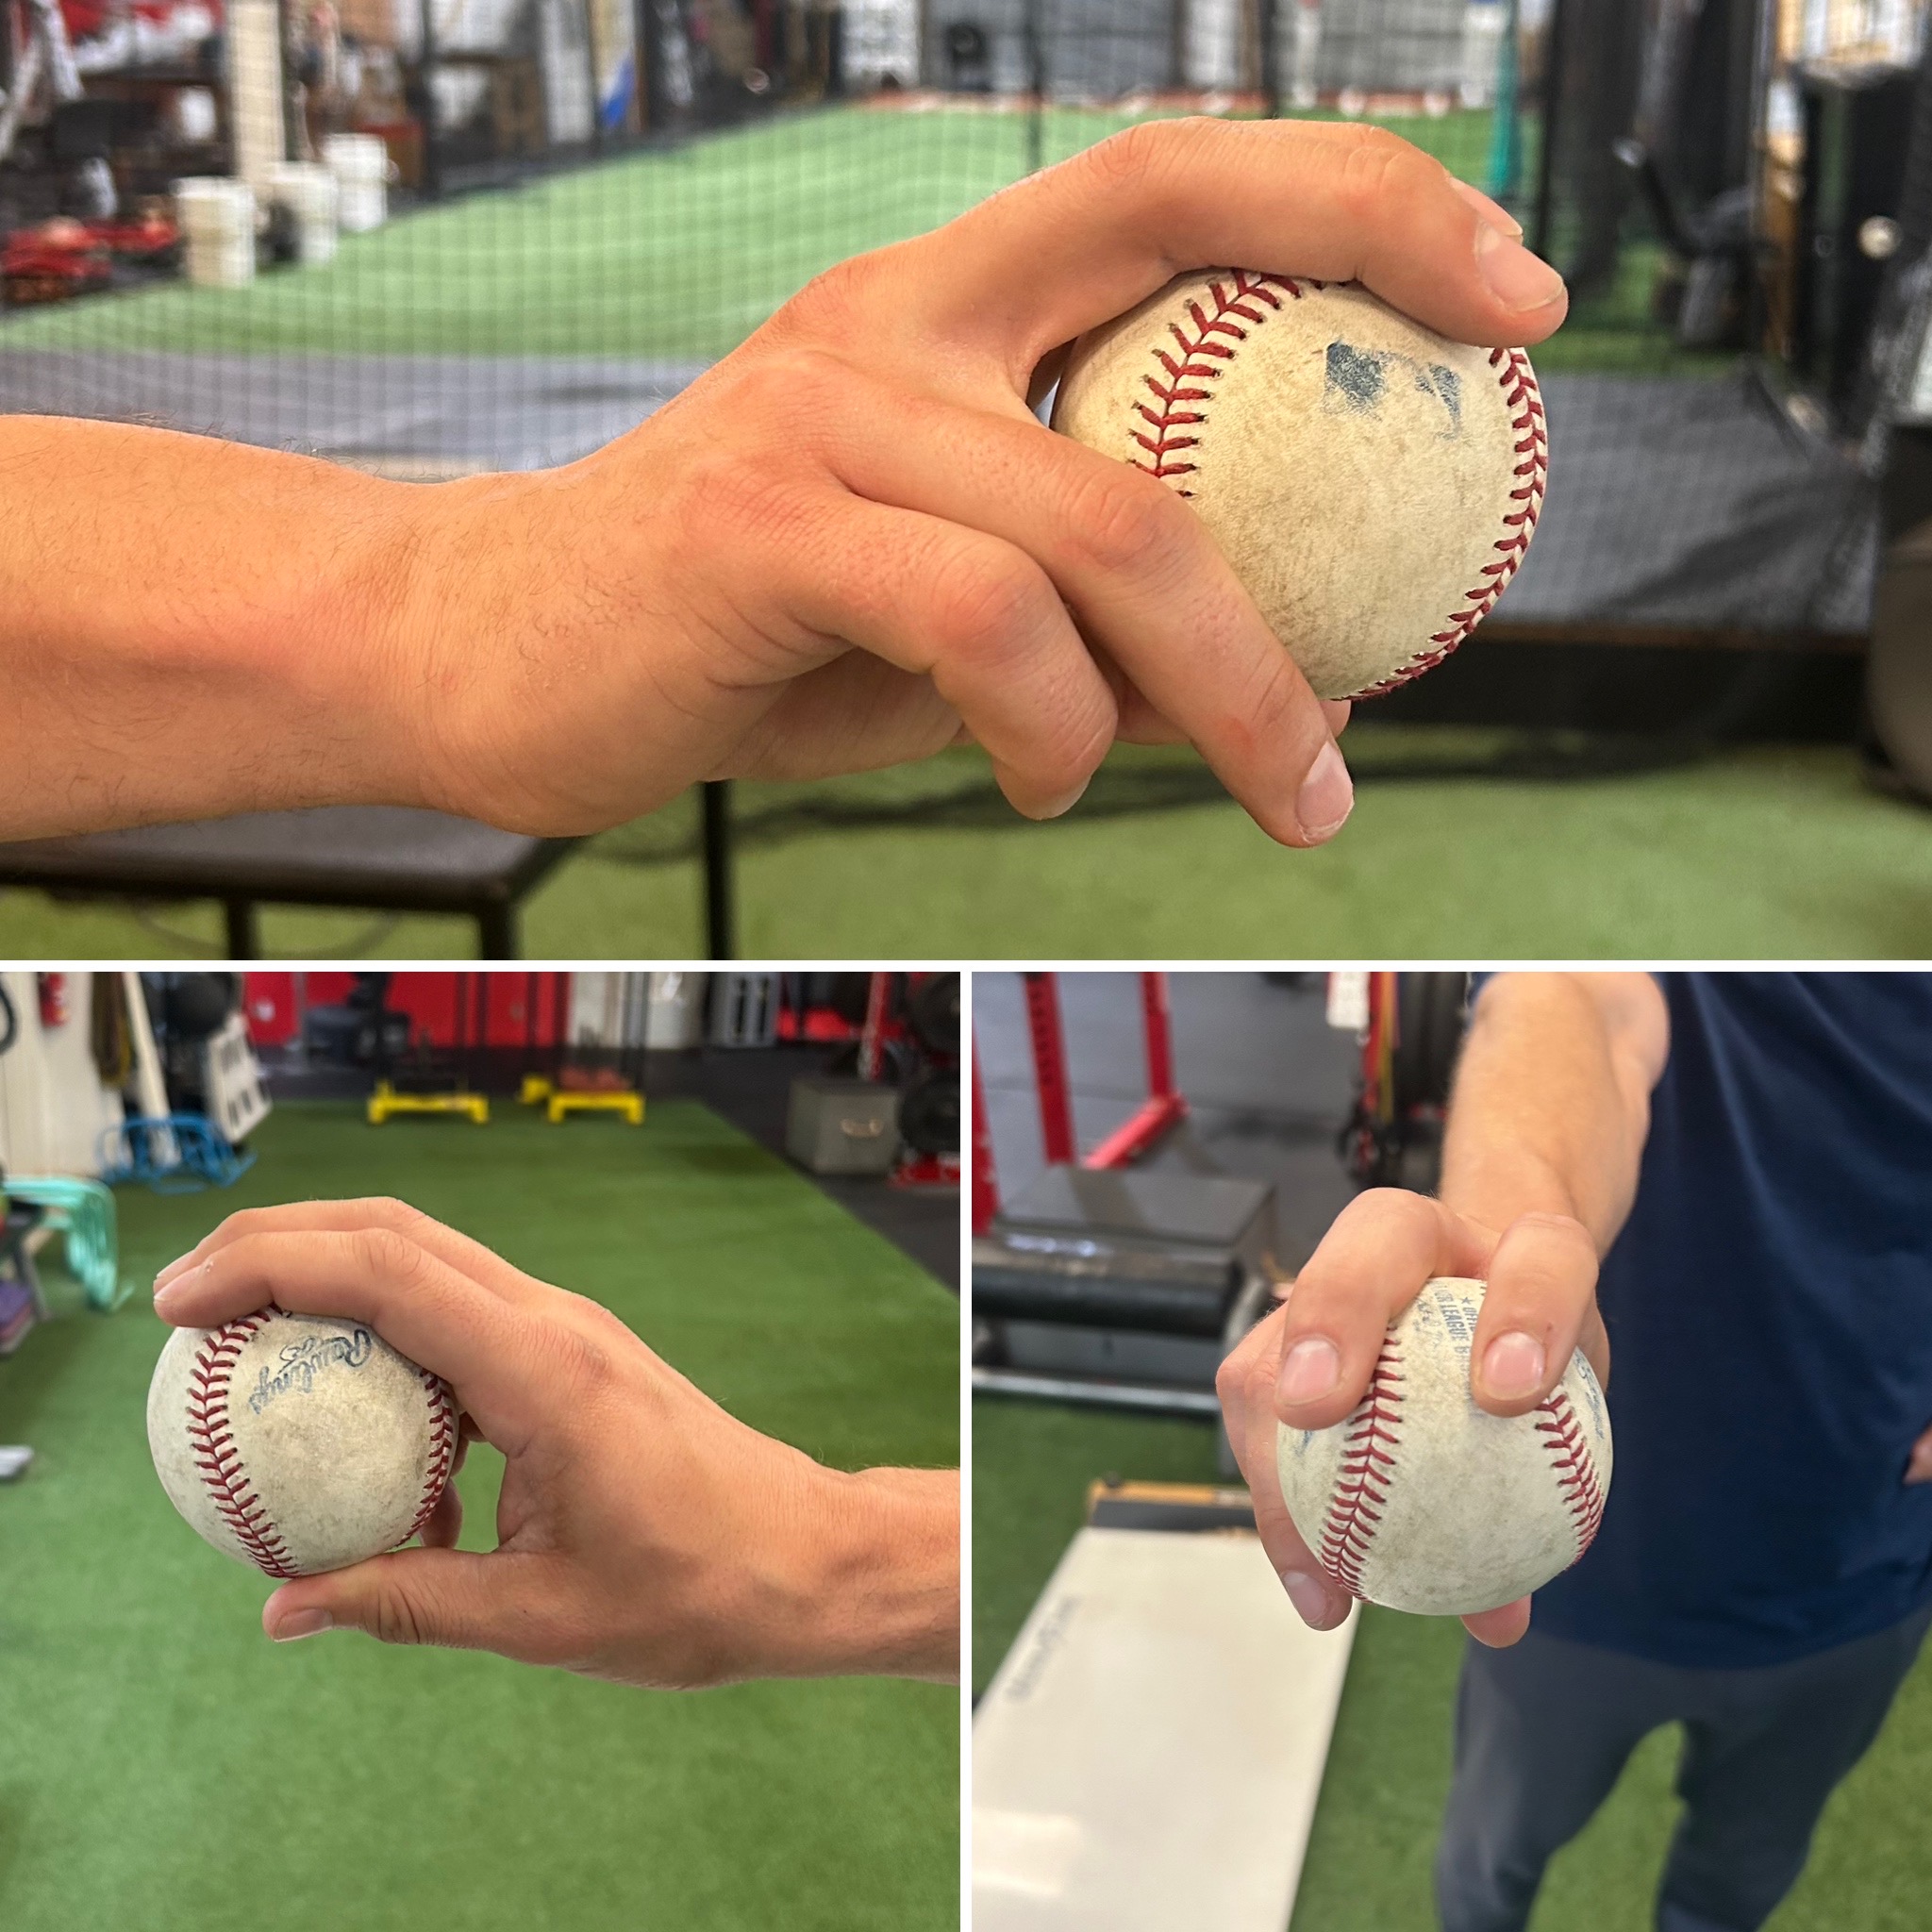 How to Throw a Sinker or 2-seam (Grips, Cues, Types, etc.) • RPP